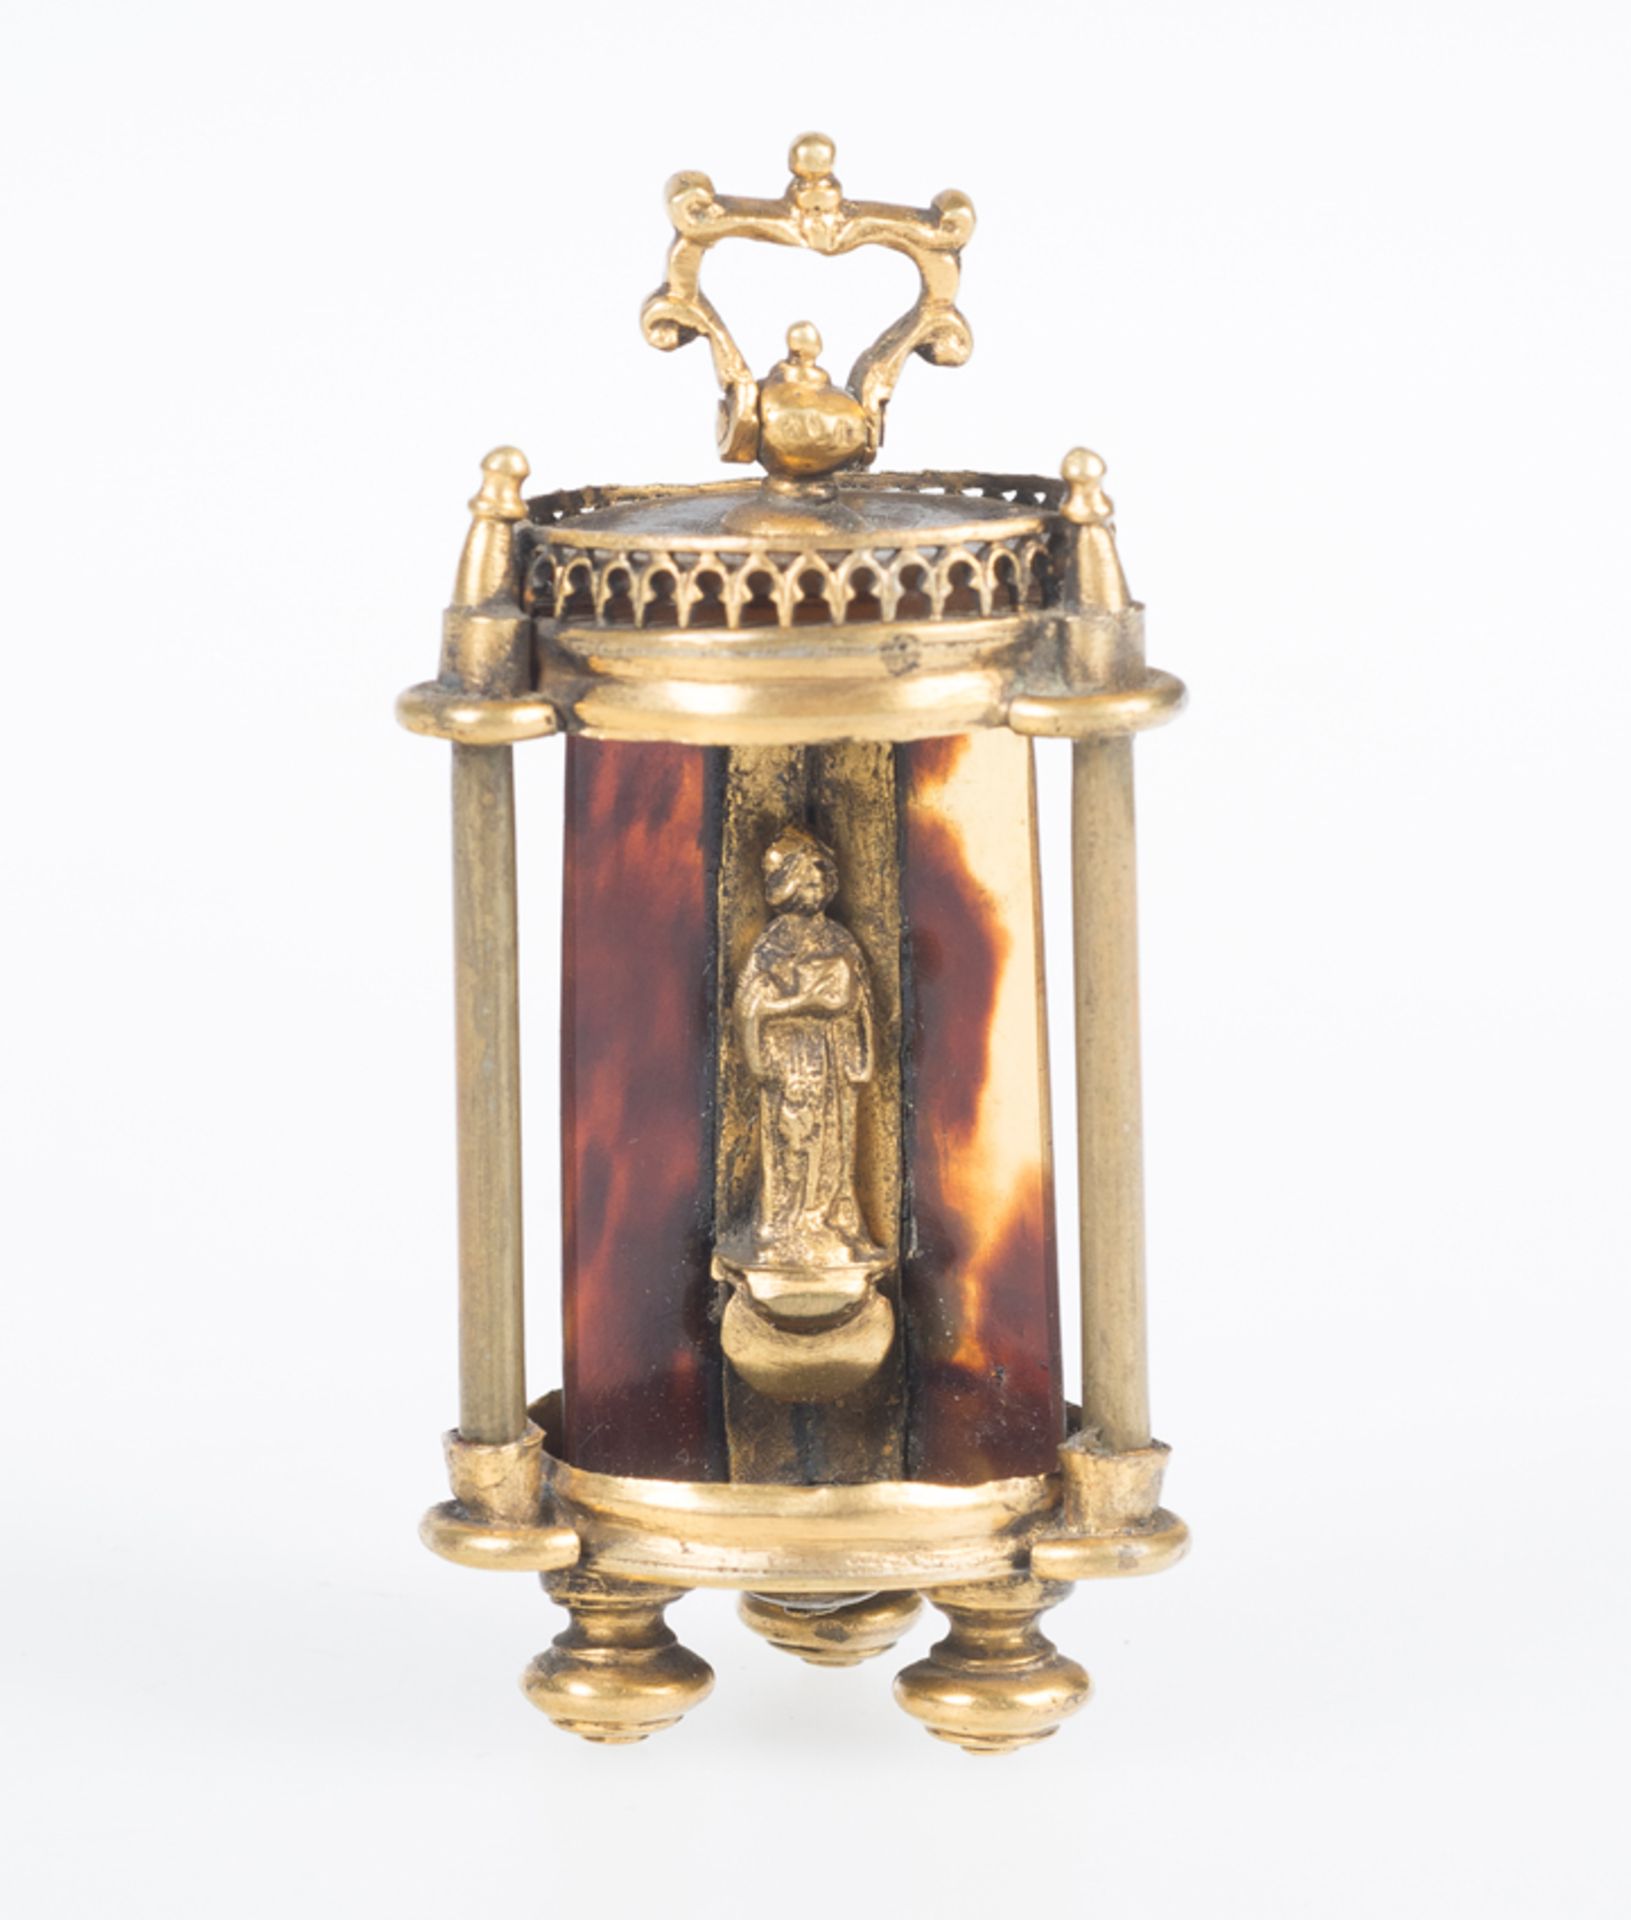 Small gilded bronze and tortoiseshell shrine pendant. Spain or Italy. 16th century. - Image 3 of 6